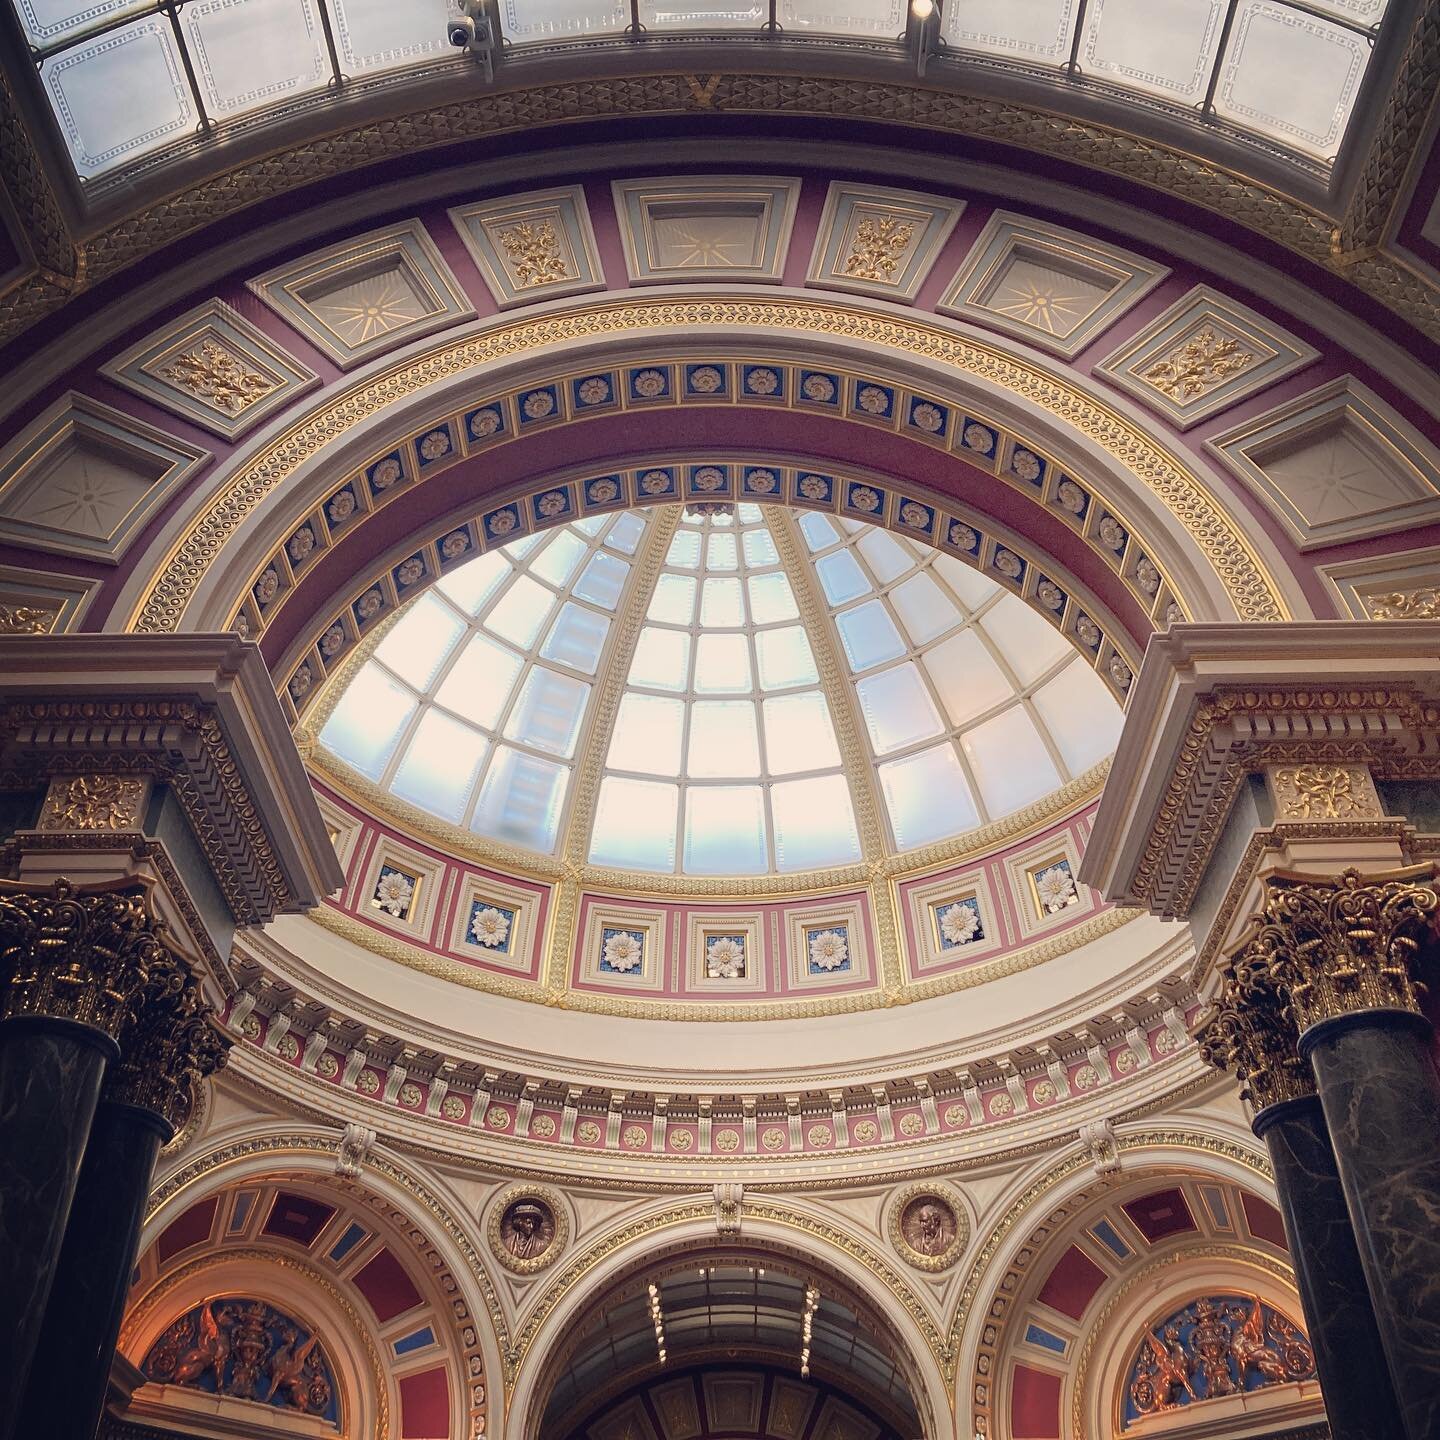 If you haven&rsquo;t been to the National Gallery in London for a while I recommend a visit, and not just for the paintings! Pre-pandemic museum trips are back on the to do list! #nationalgallerylondon #nationalgallery #architecture #autometry_ltd #l